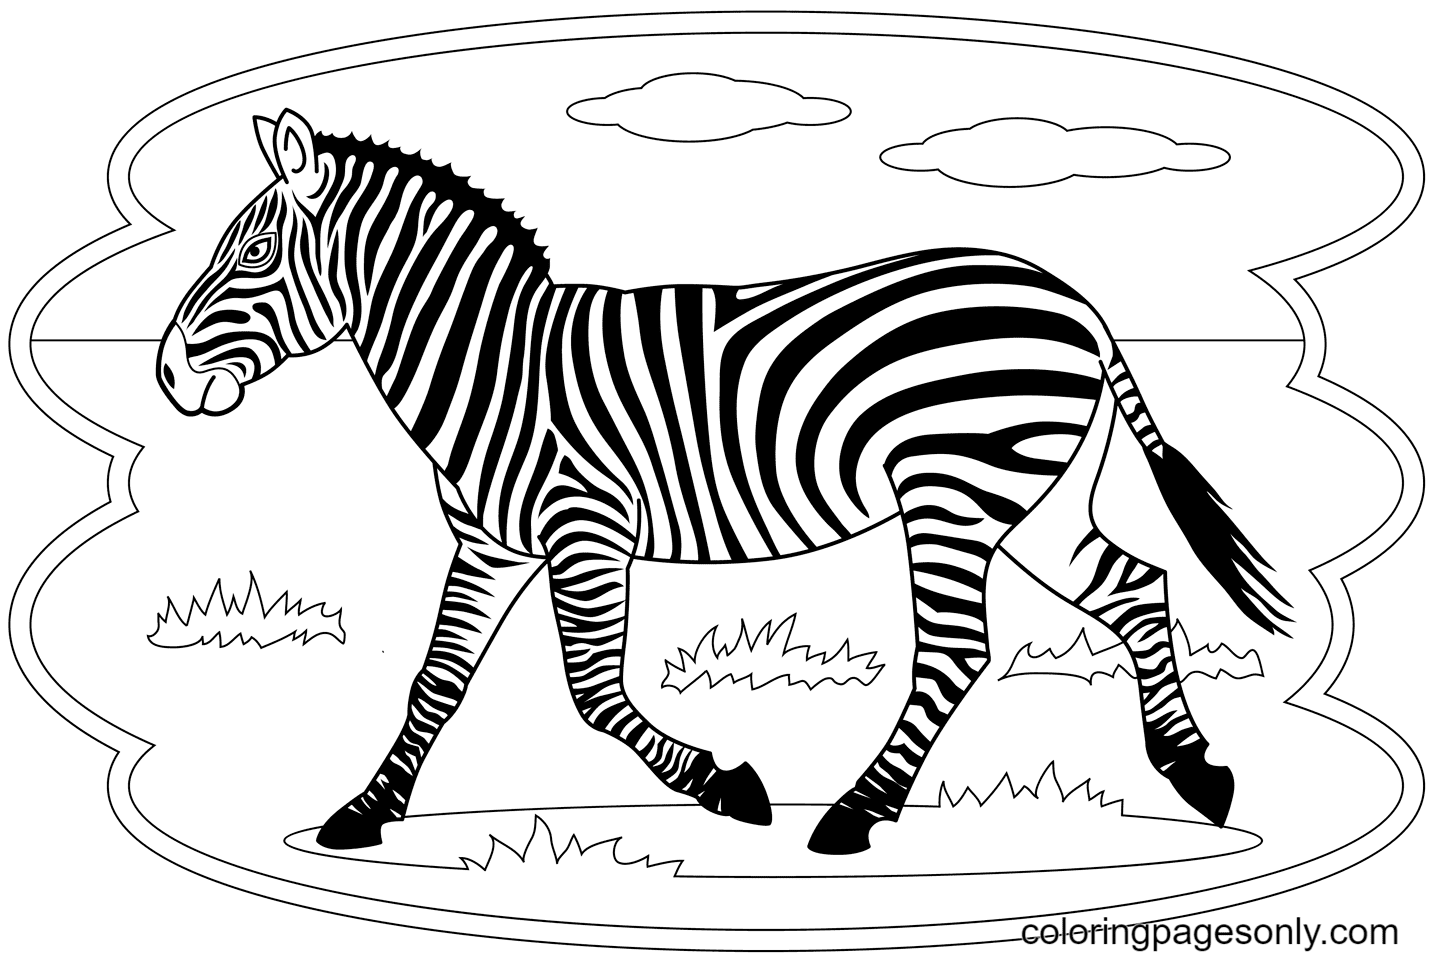 A Zebra walking in The Meadow Coloring Page